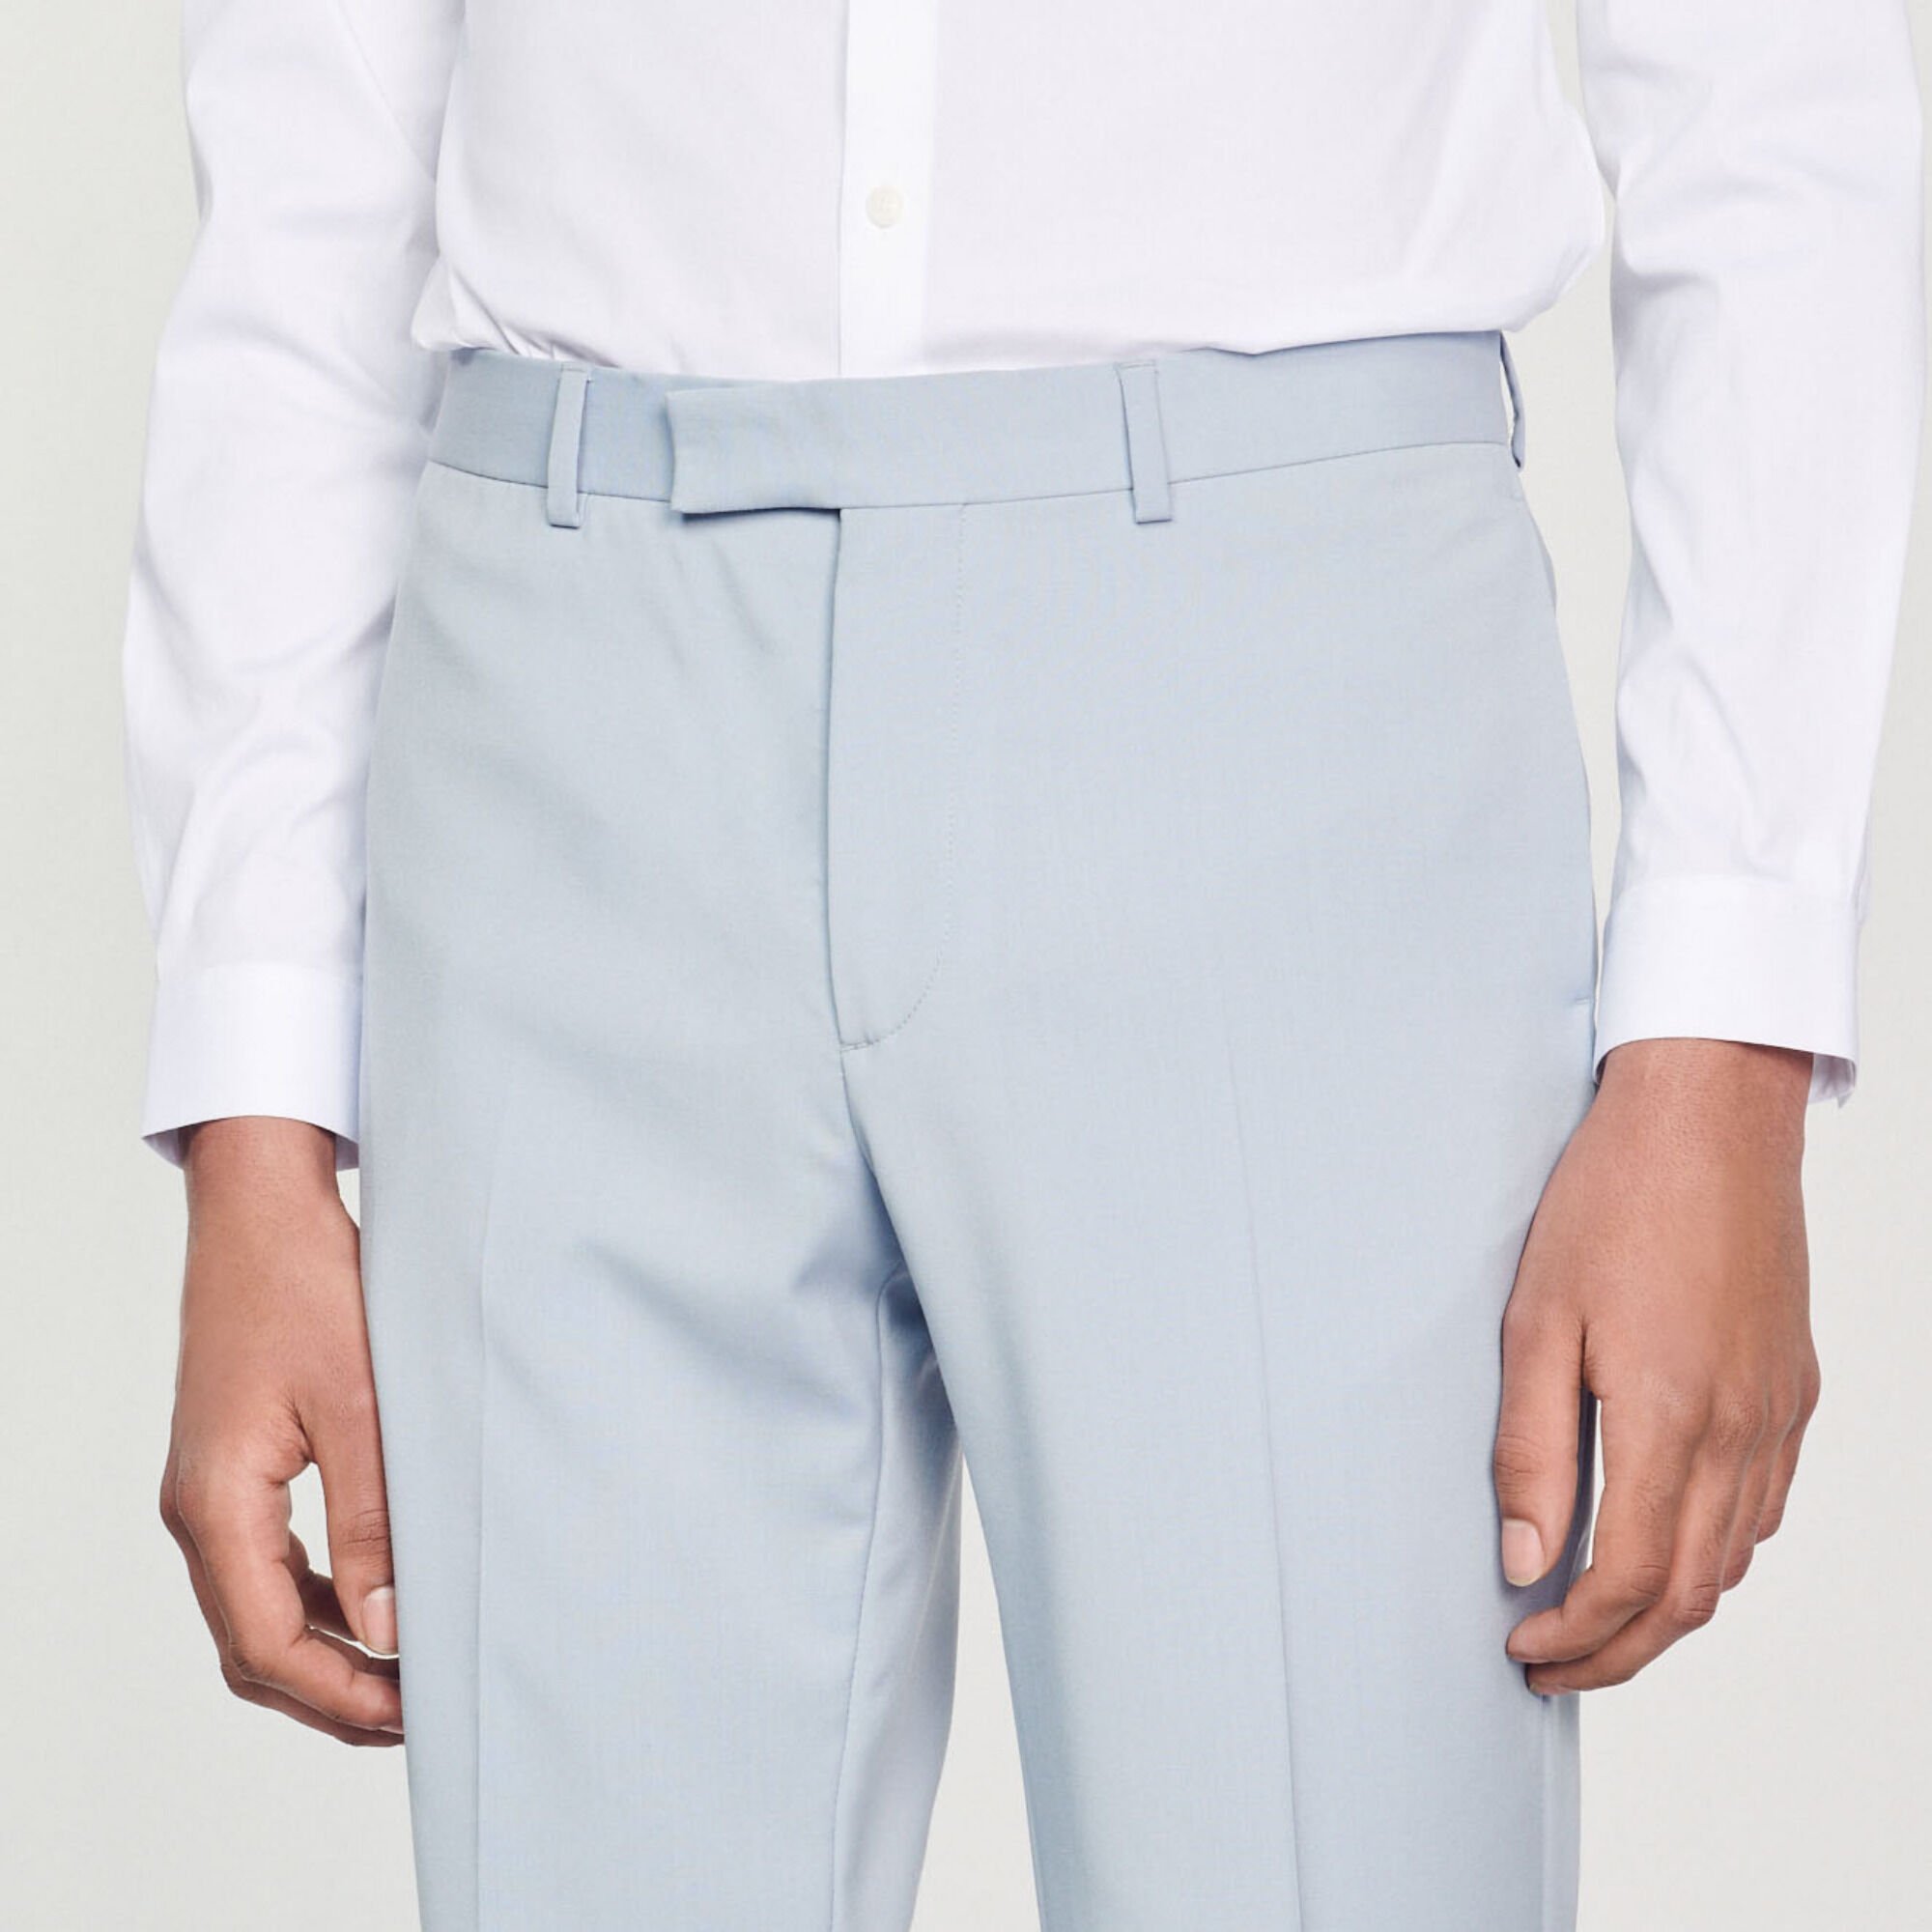 Twisted Tailor wedding super skinny suit pants in light blue | ASOS